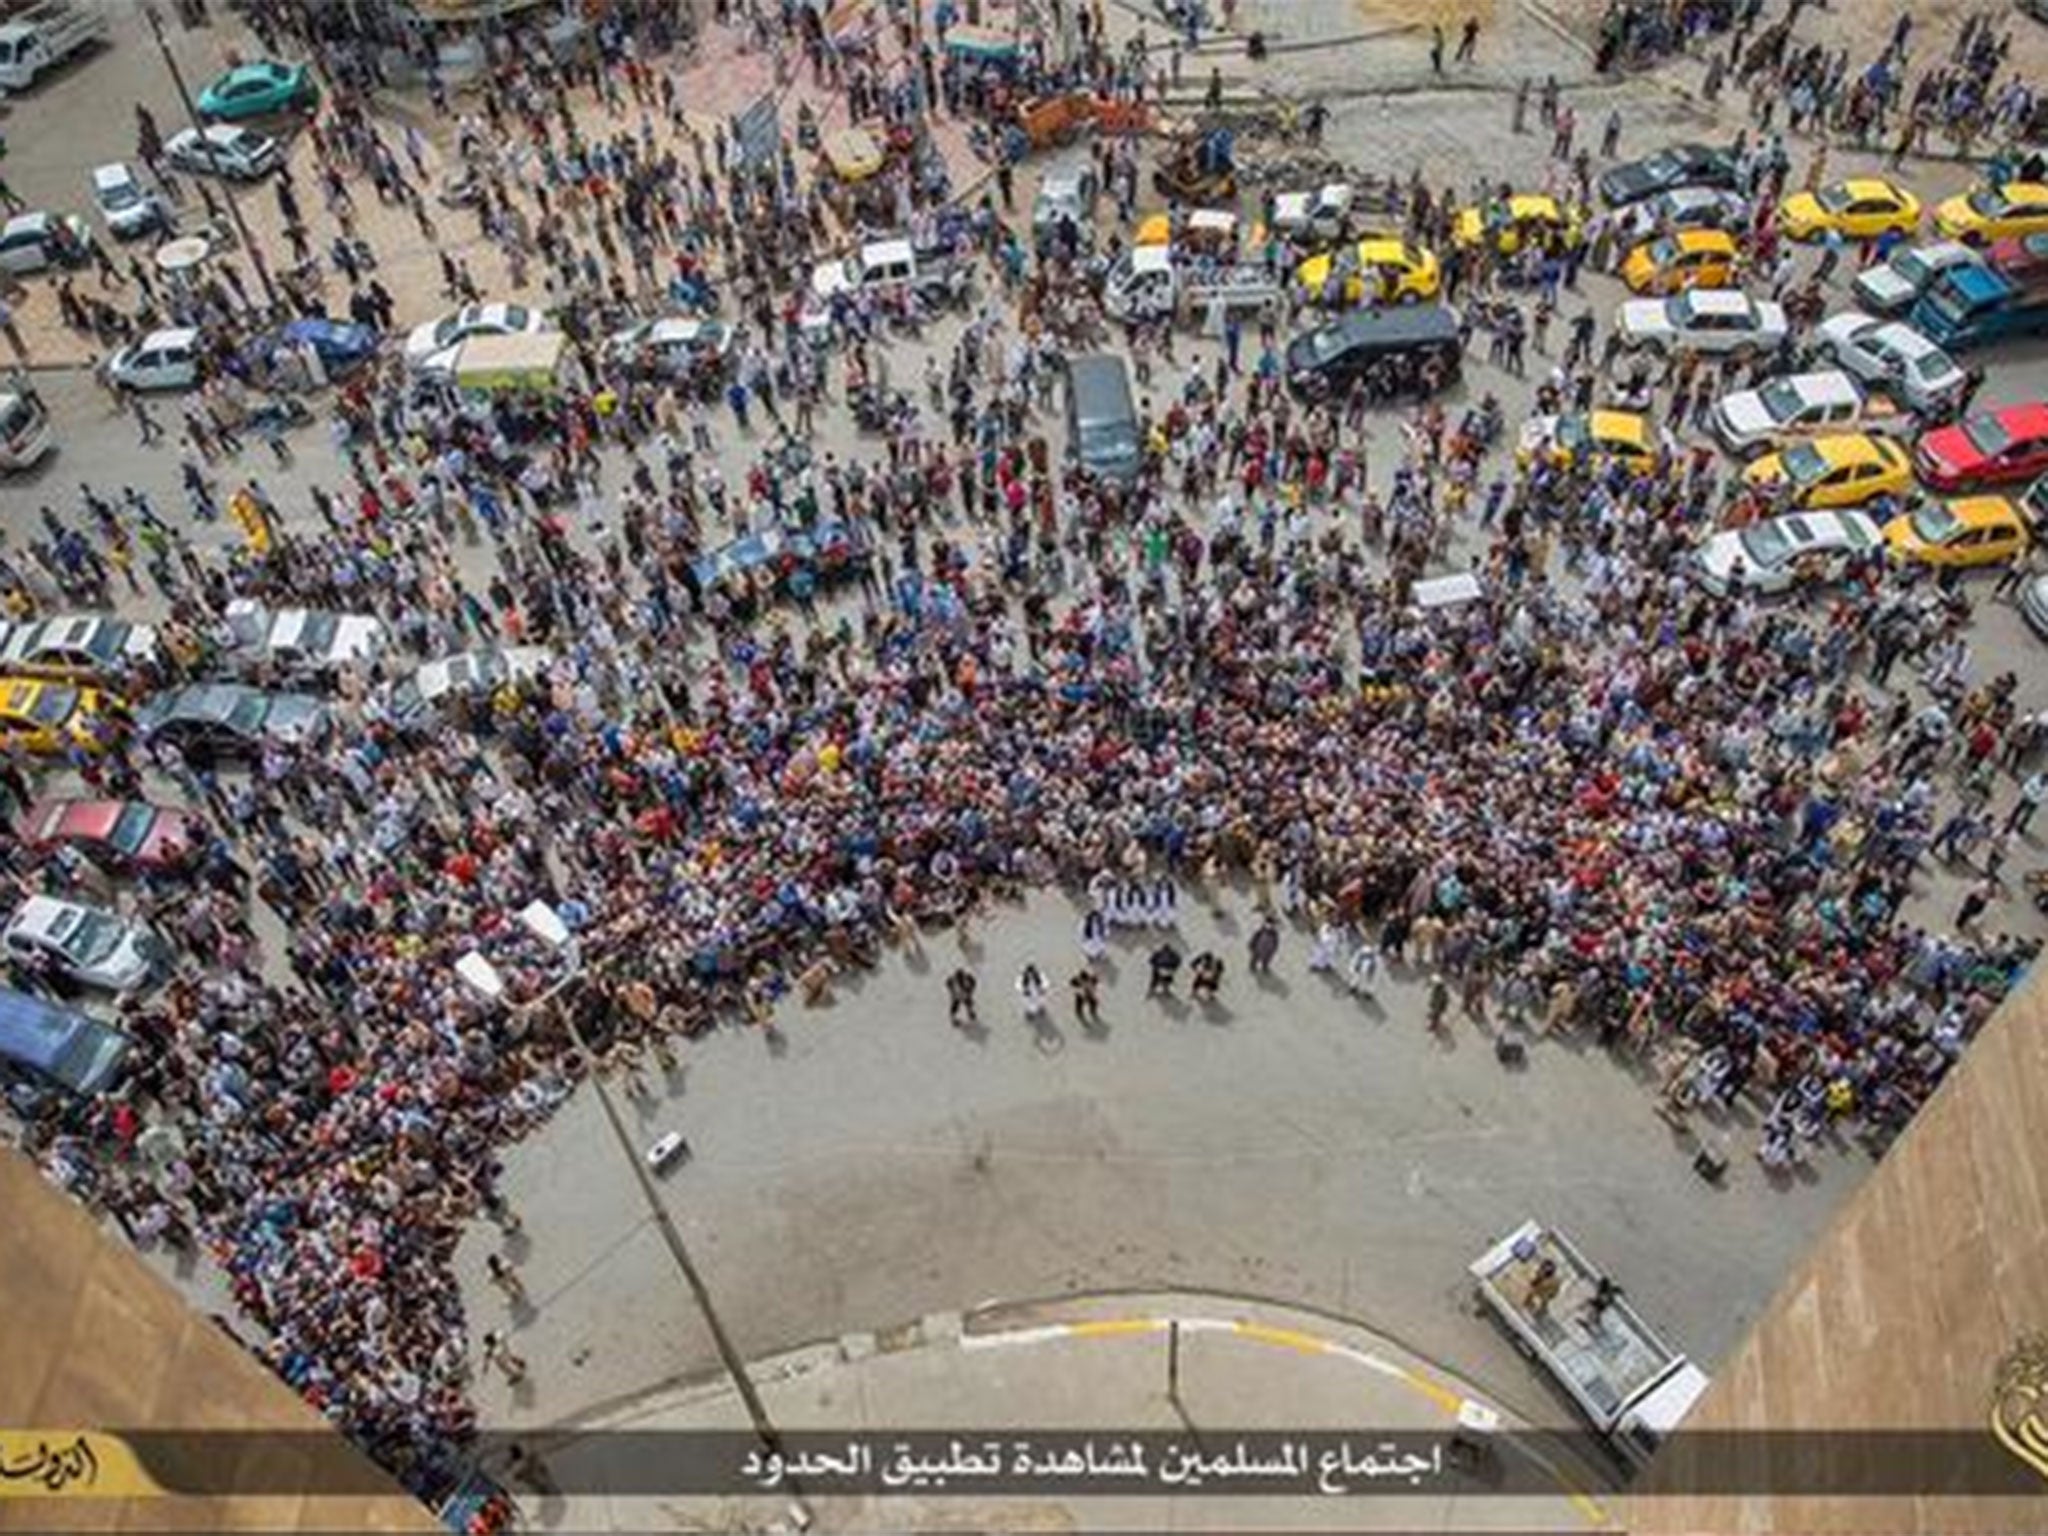 Isis released images showing a large crowd, reportedly armed with stones, watching the executions